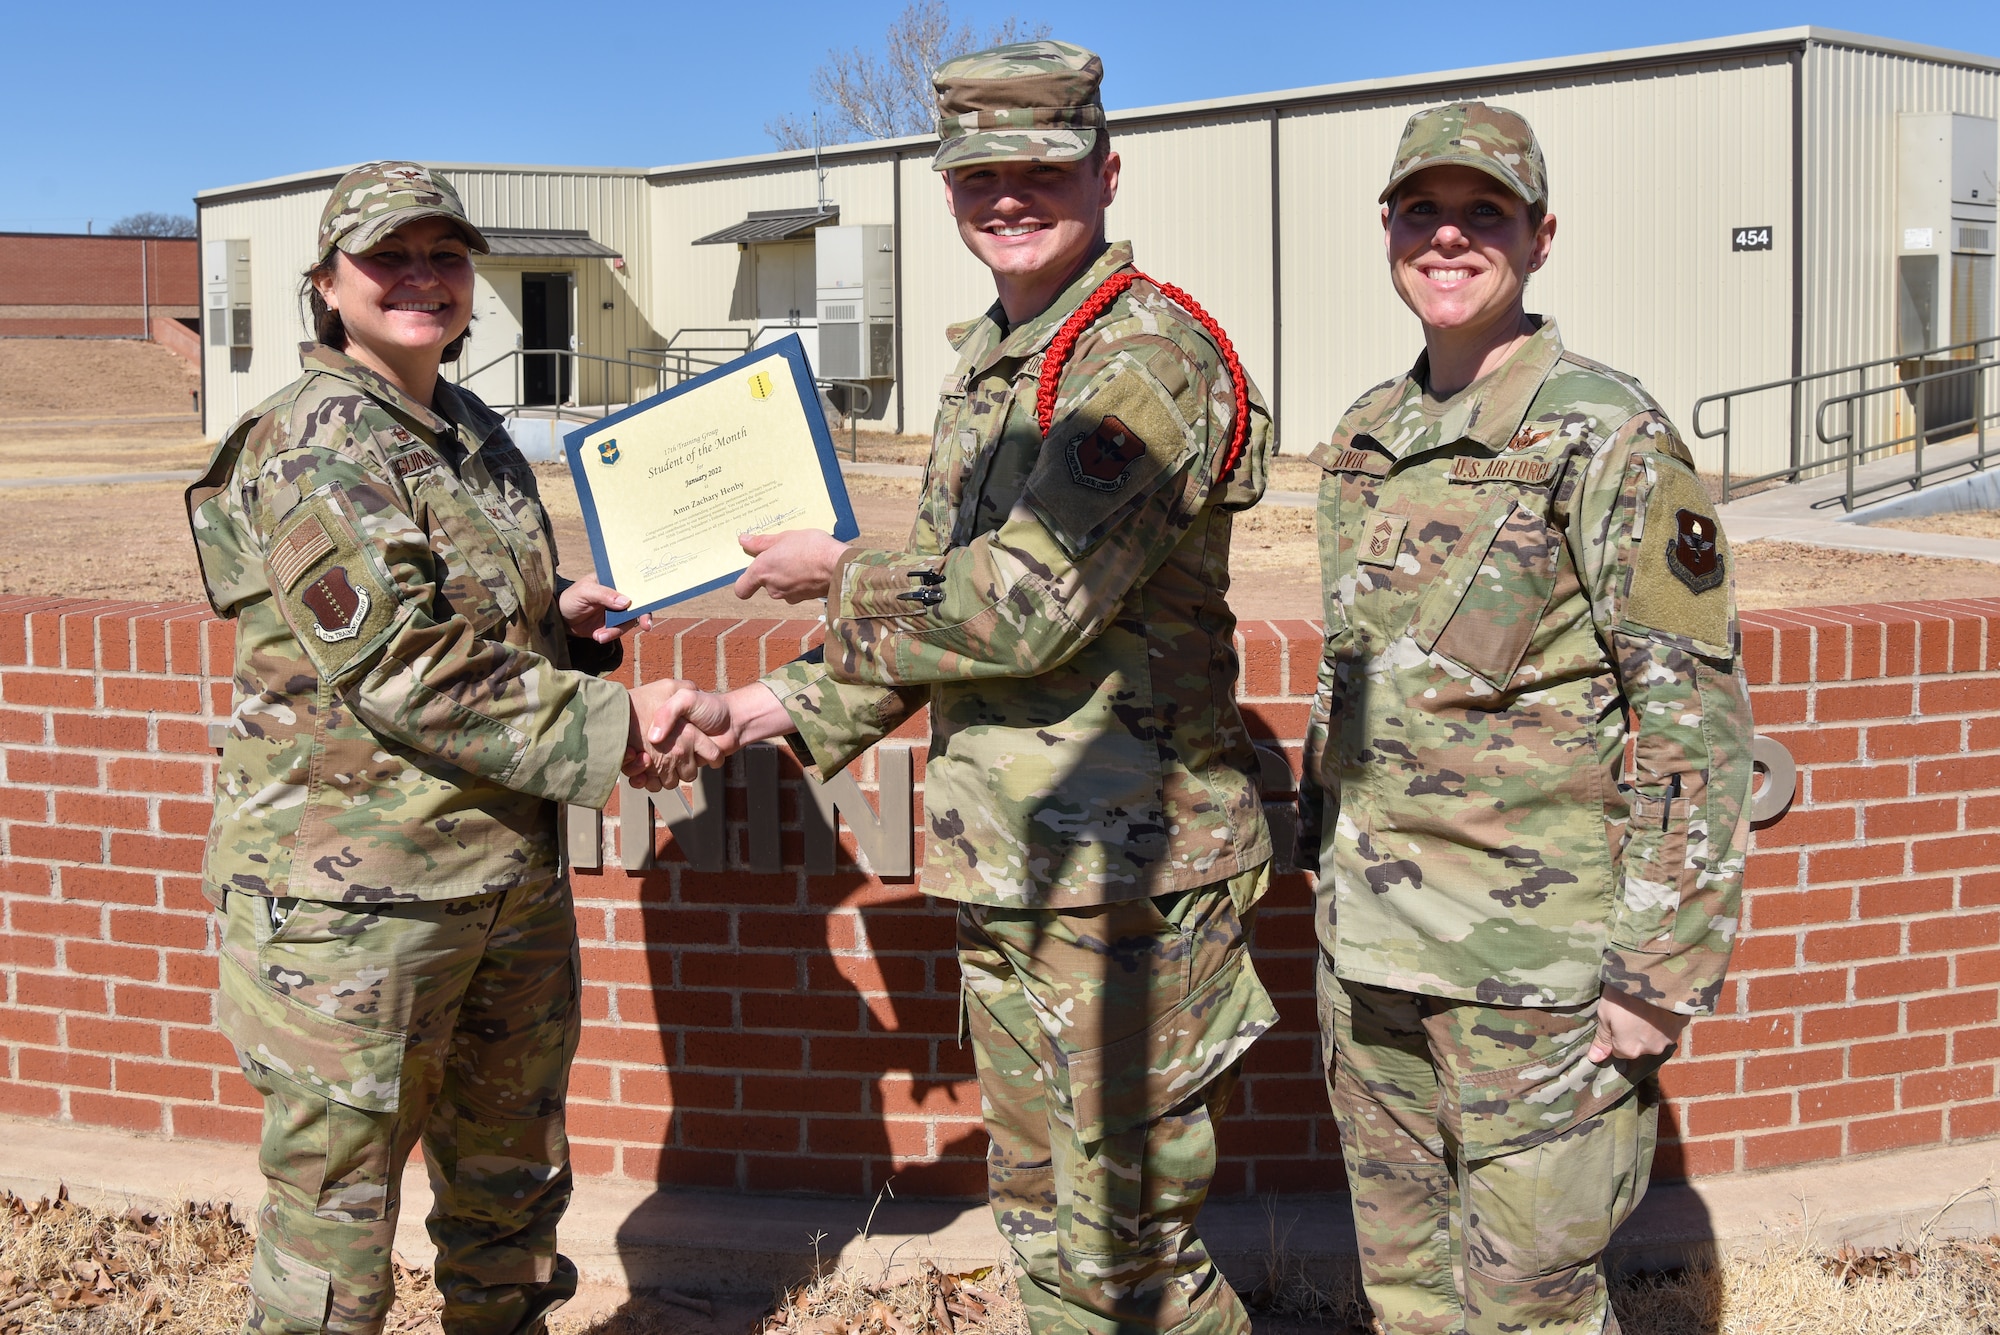 U.S. Air Force Col. Angelina Maguinness, 17th Training Group commander, and Chief Master Sgt. Breana Oliver, 17th TRG superintendent, presents Airman Zachary Henby, 315th Training Squadron student, a 17th TRG Student of the Month award for January 2022, outside of Brandenburg Hall, Goodfellow Air Force Base, Texas, Feb. 18, 2022. The 315th TRS’s mission is to train, educate and inspire the future intelligence, surveillance and reconnaissance warriors. (U.S. Air Force photo by Staff Sgt. Jermaine Ayers)